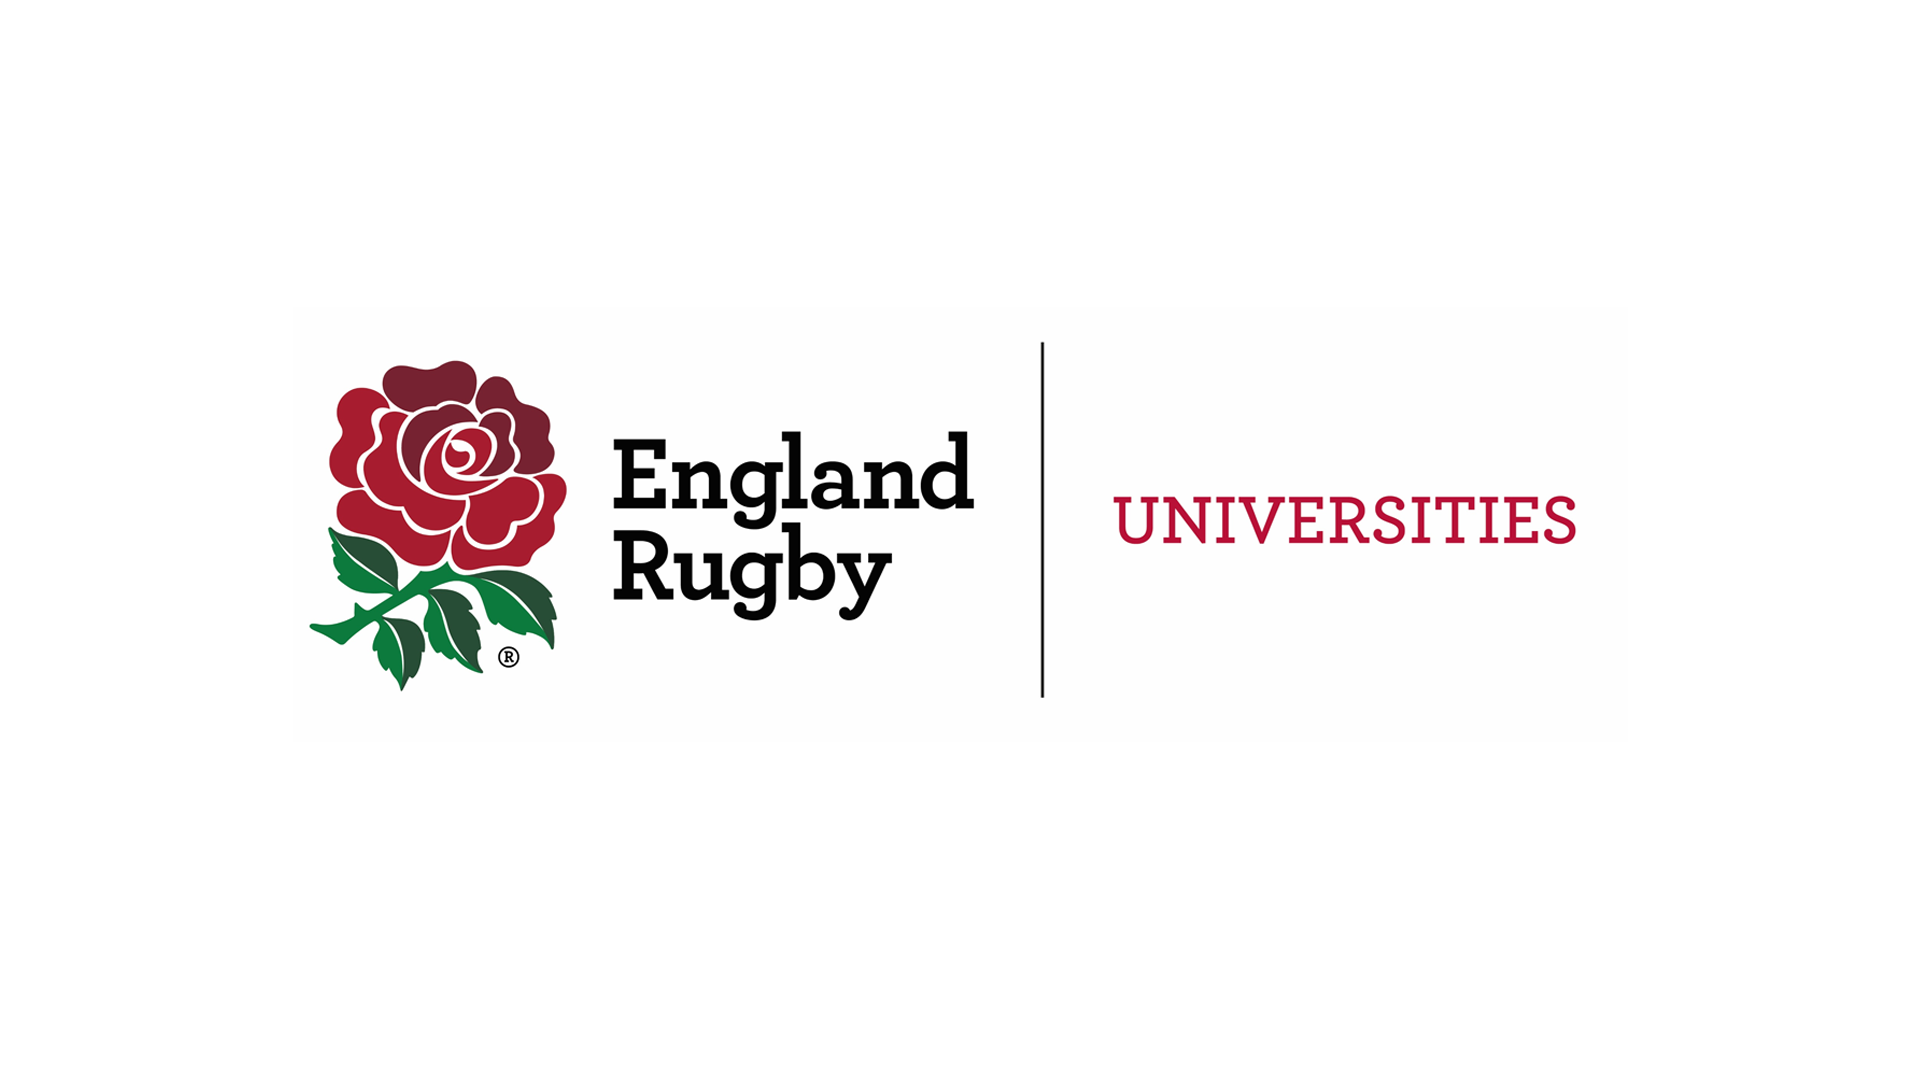 England Rugby - Universities